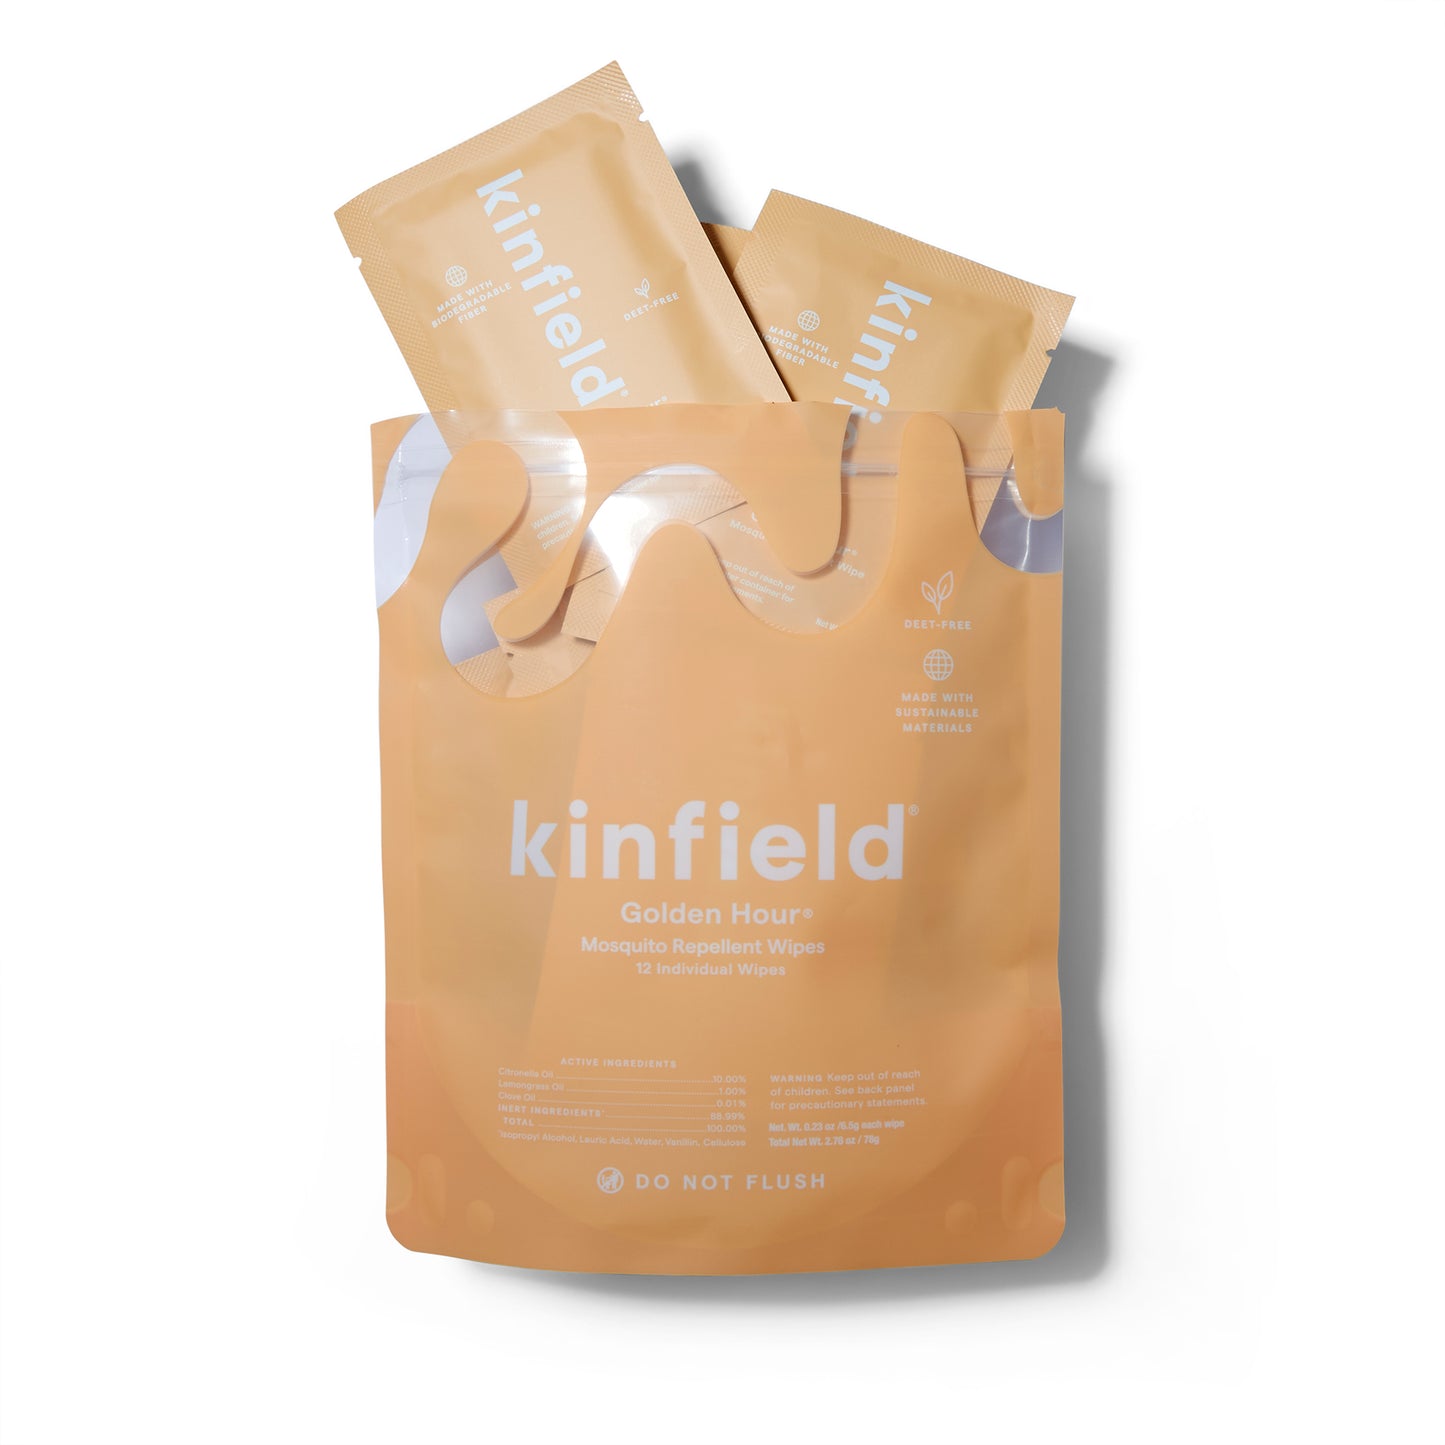 Outer packaging of the Kinfield Golden Hour Mosquito Repellant Wipes. The package is opened with several of the individual sachets poking out of the package. 